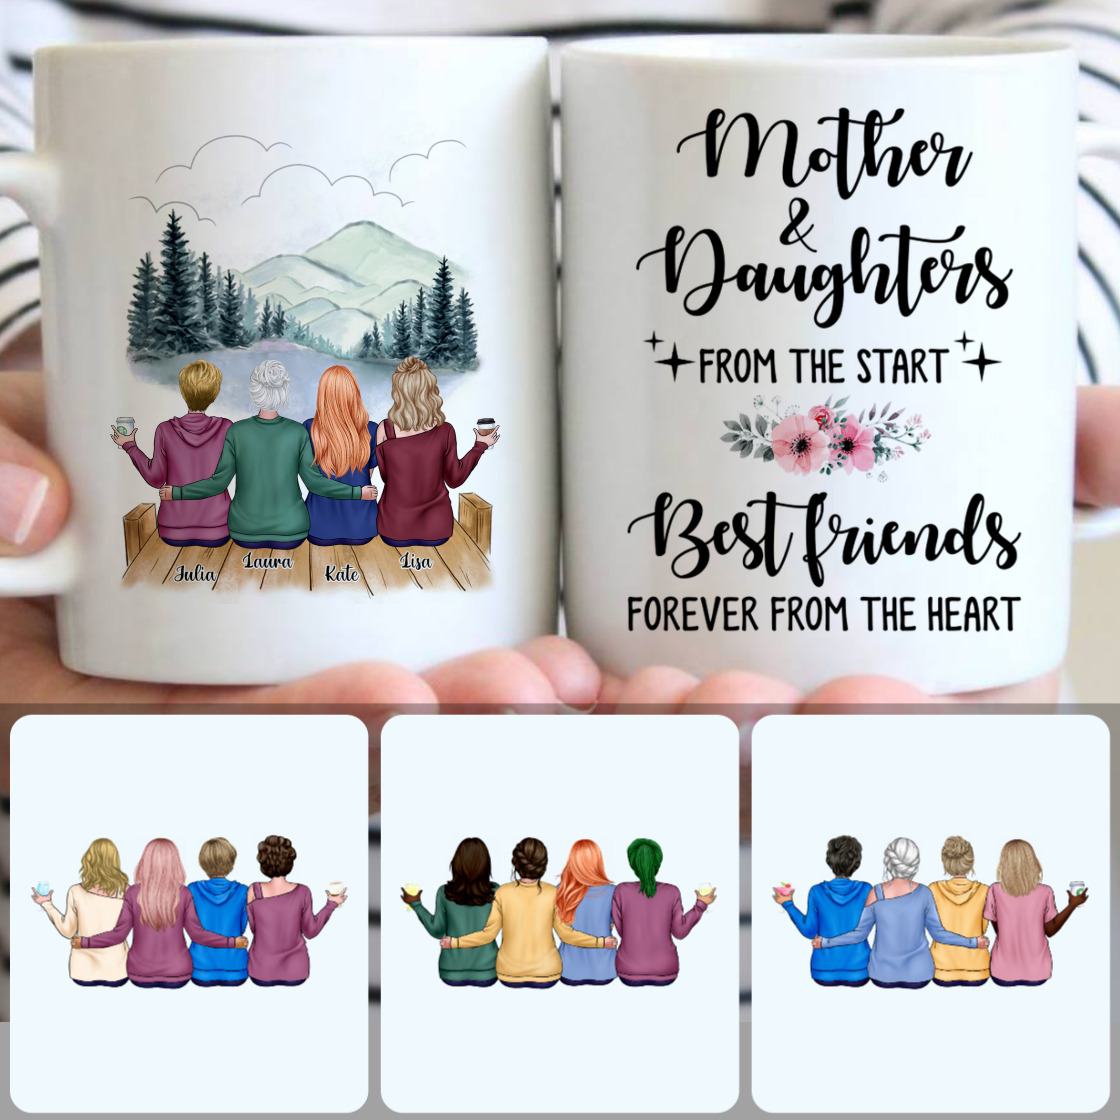 Personalized Mug, Memorial Gifts For Stepmom, Mother & 3 Daughters Customized Coffee Mug With Names